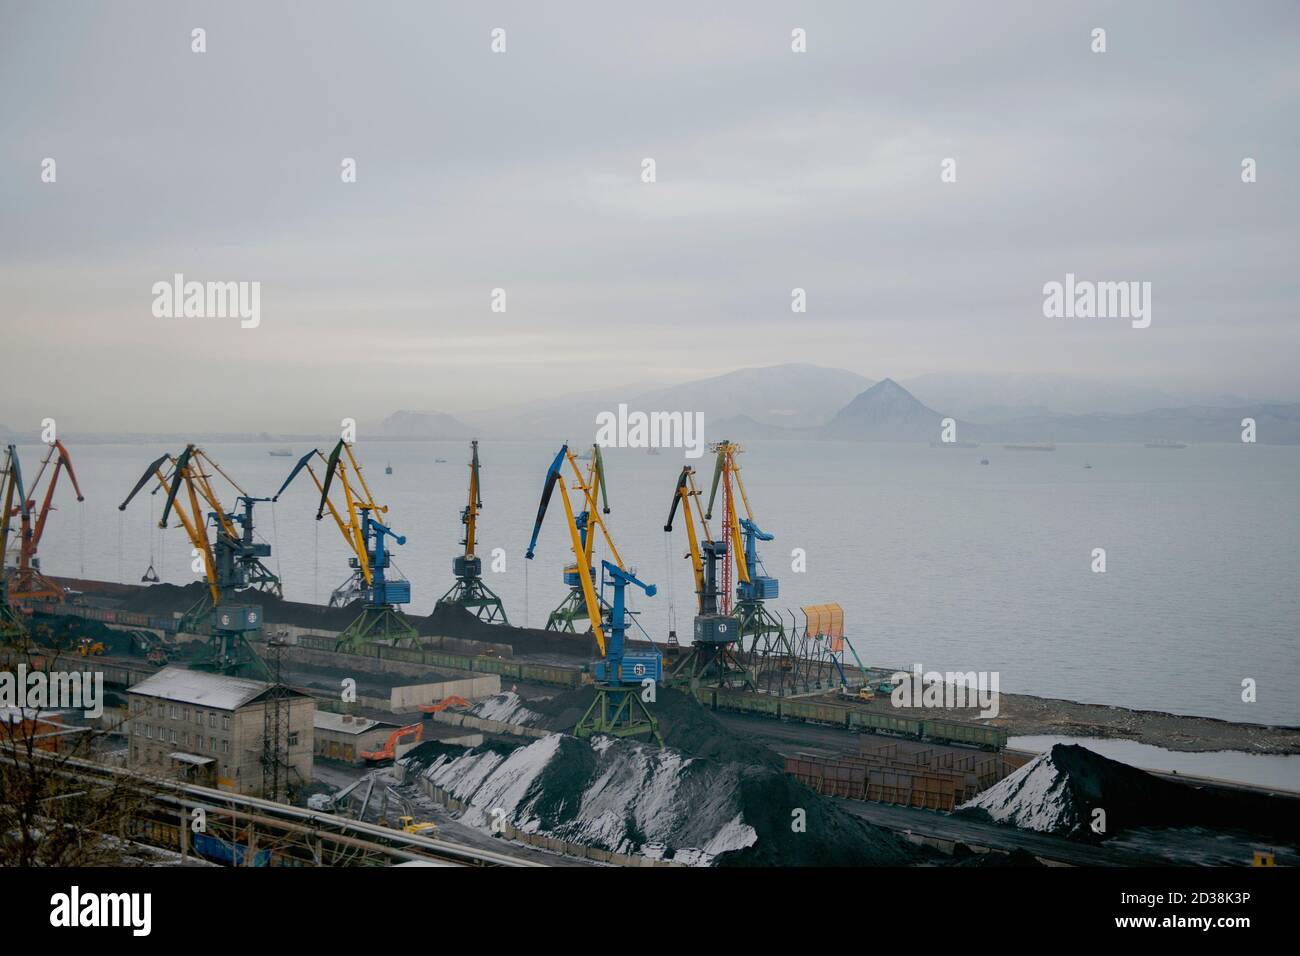 A row of cranes in the port of Nakhodka in Russia's Far East Stock Photo